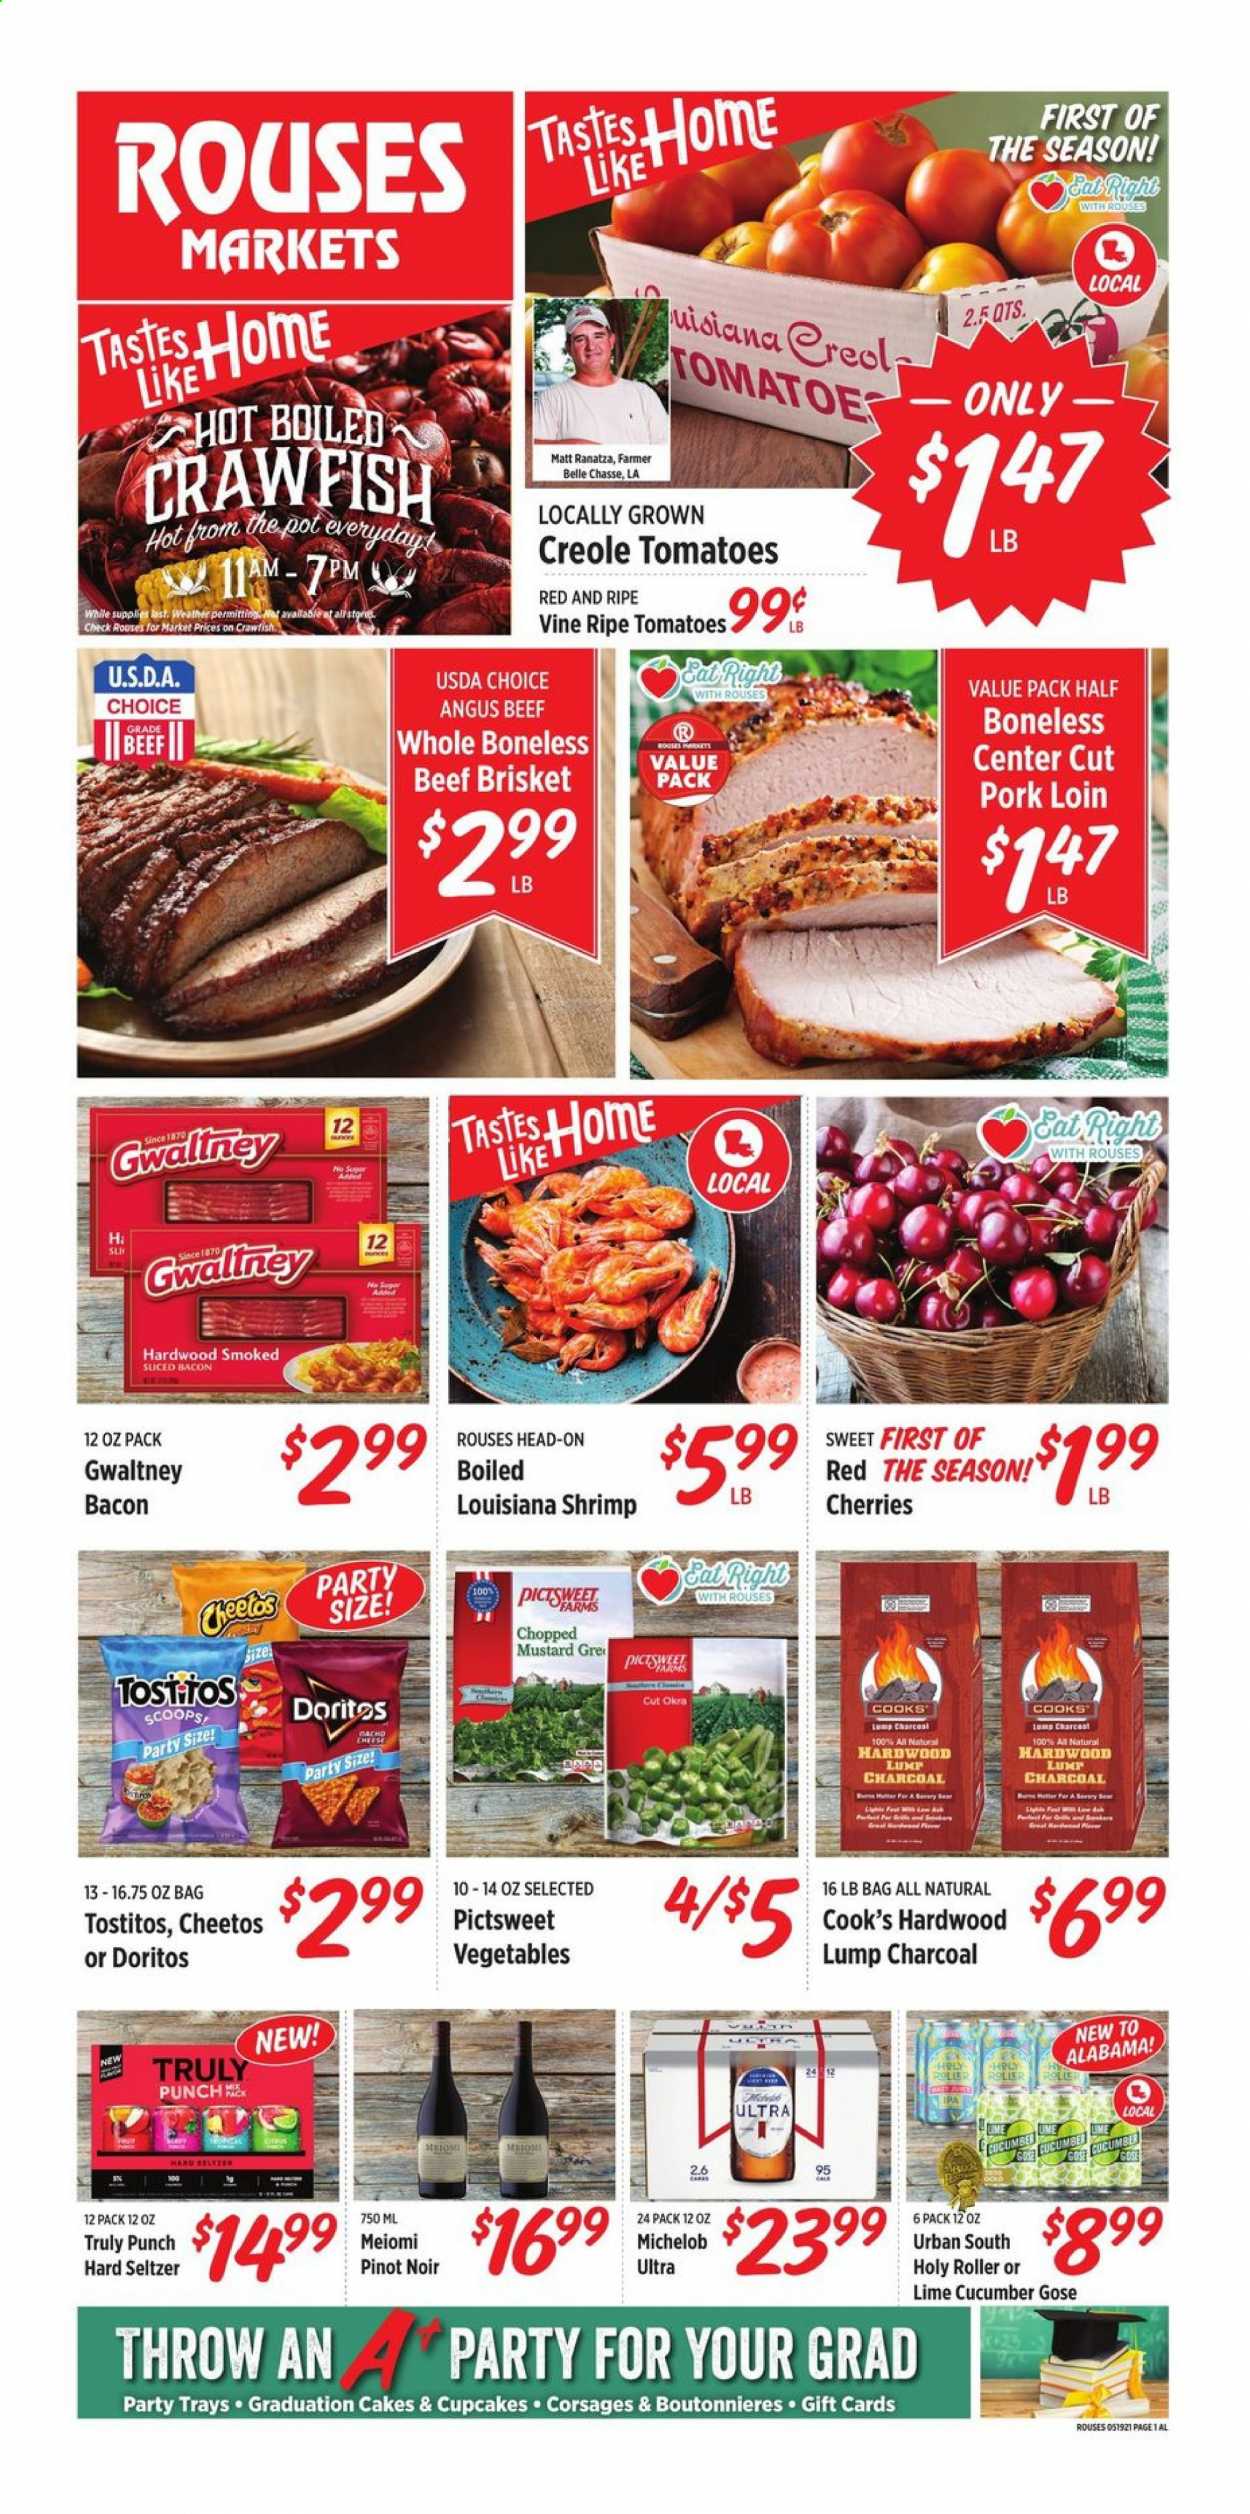 thumbnail - Rouses Markets Flyer - 05/19/2021 - 05/26/2021 - Sales products - Michelob, cake, cupcake, tomatoes, okra, cherries, shrimps, bacon, crawfish, Doritos, Cheetos, Tostitos, mustard, red wine, wine, Pinot Noir, punch, Hard Seltzer, beer, IPA, beef meat, beef brisket, pork loin, pork meat. Page 1.